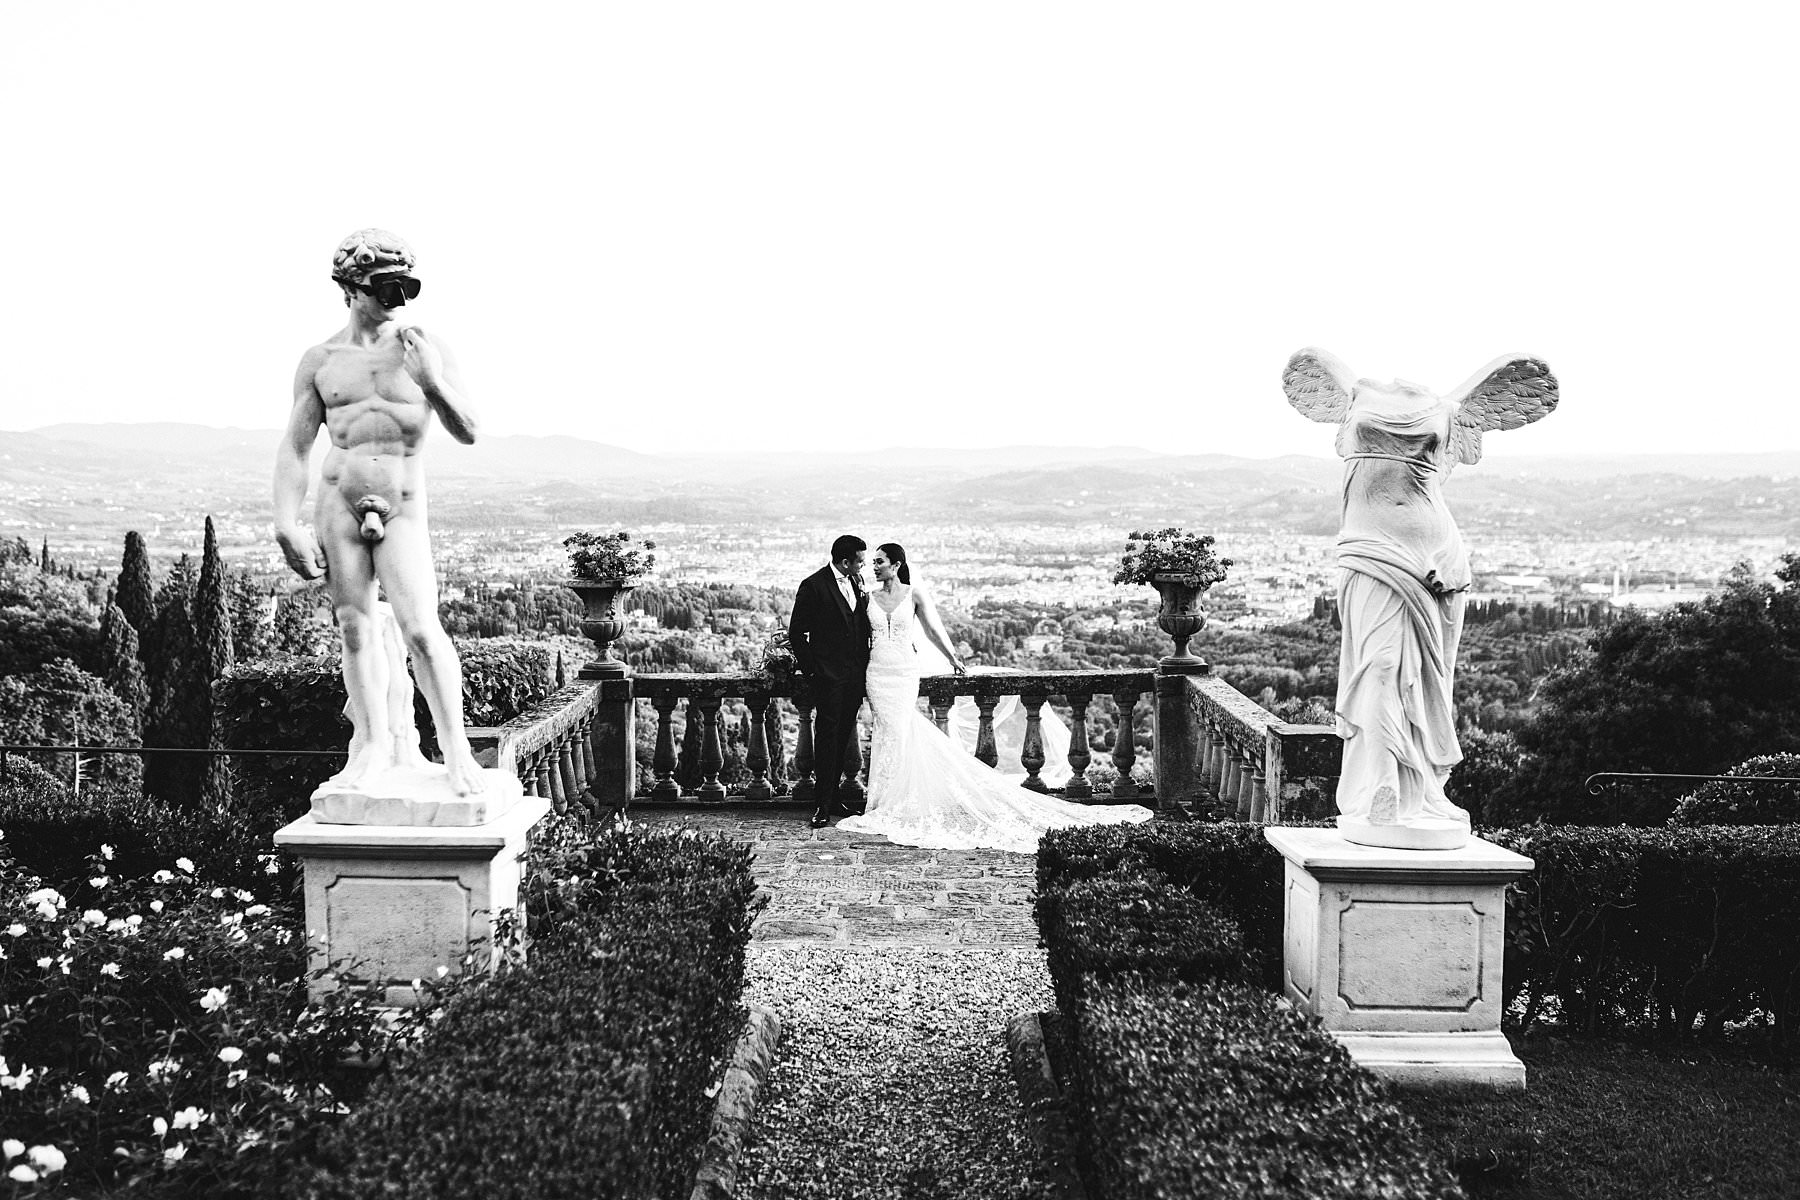 Graceful prewedding sunrise photos in Florence and intimate wedding in Italy at the incredible Belmond Villa San Michele. When you choose to have an intimate wedding in Italy, you might as well enjoy it at the fullest even before the big day itself. How? For example shooting dreamy sunrise photos to celebrate your engagement, and then saying “I do” in a breathtaking location right out of Florence. This is what Liza and Justin did